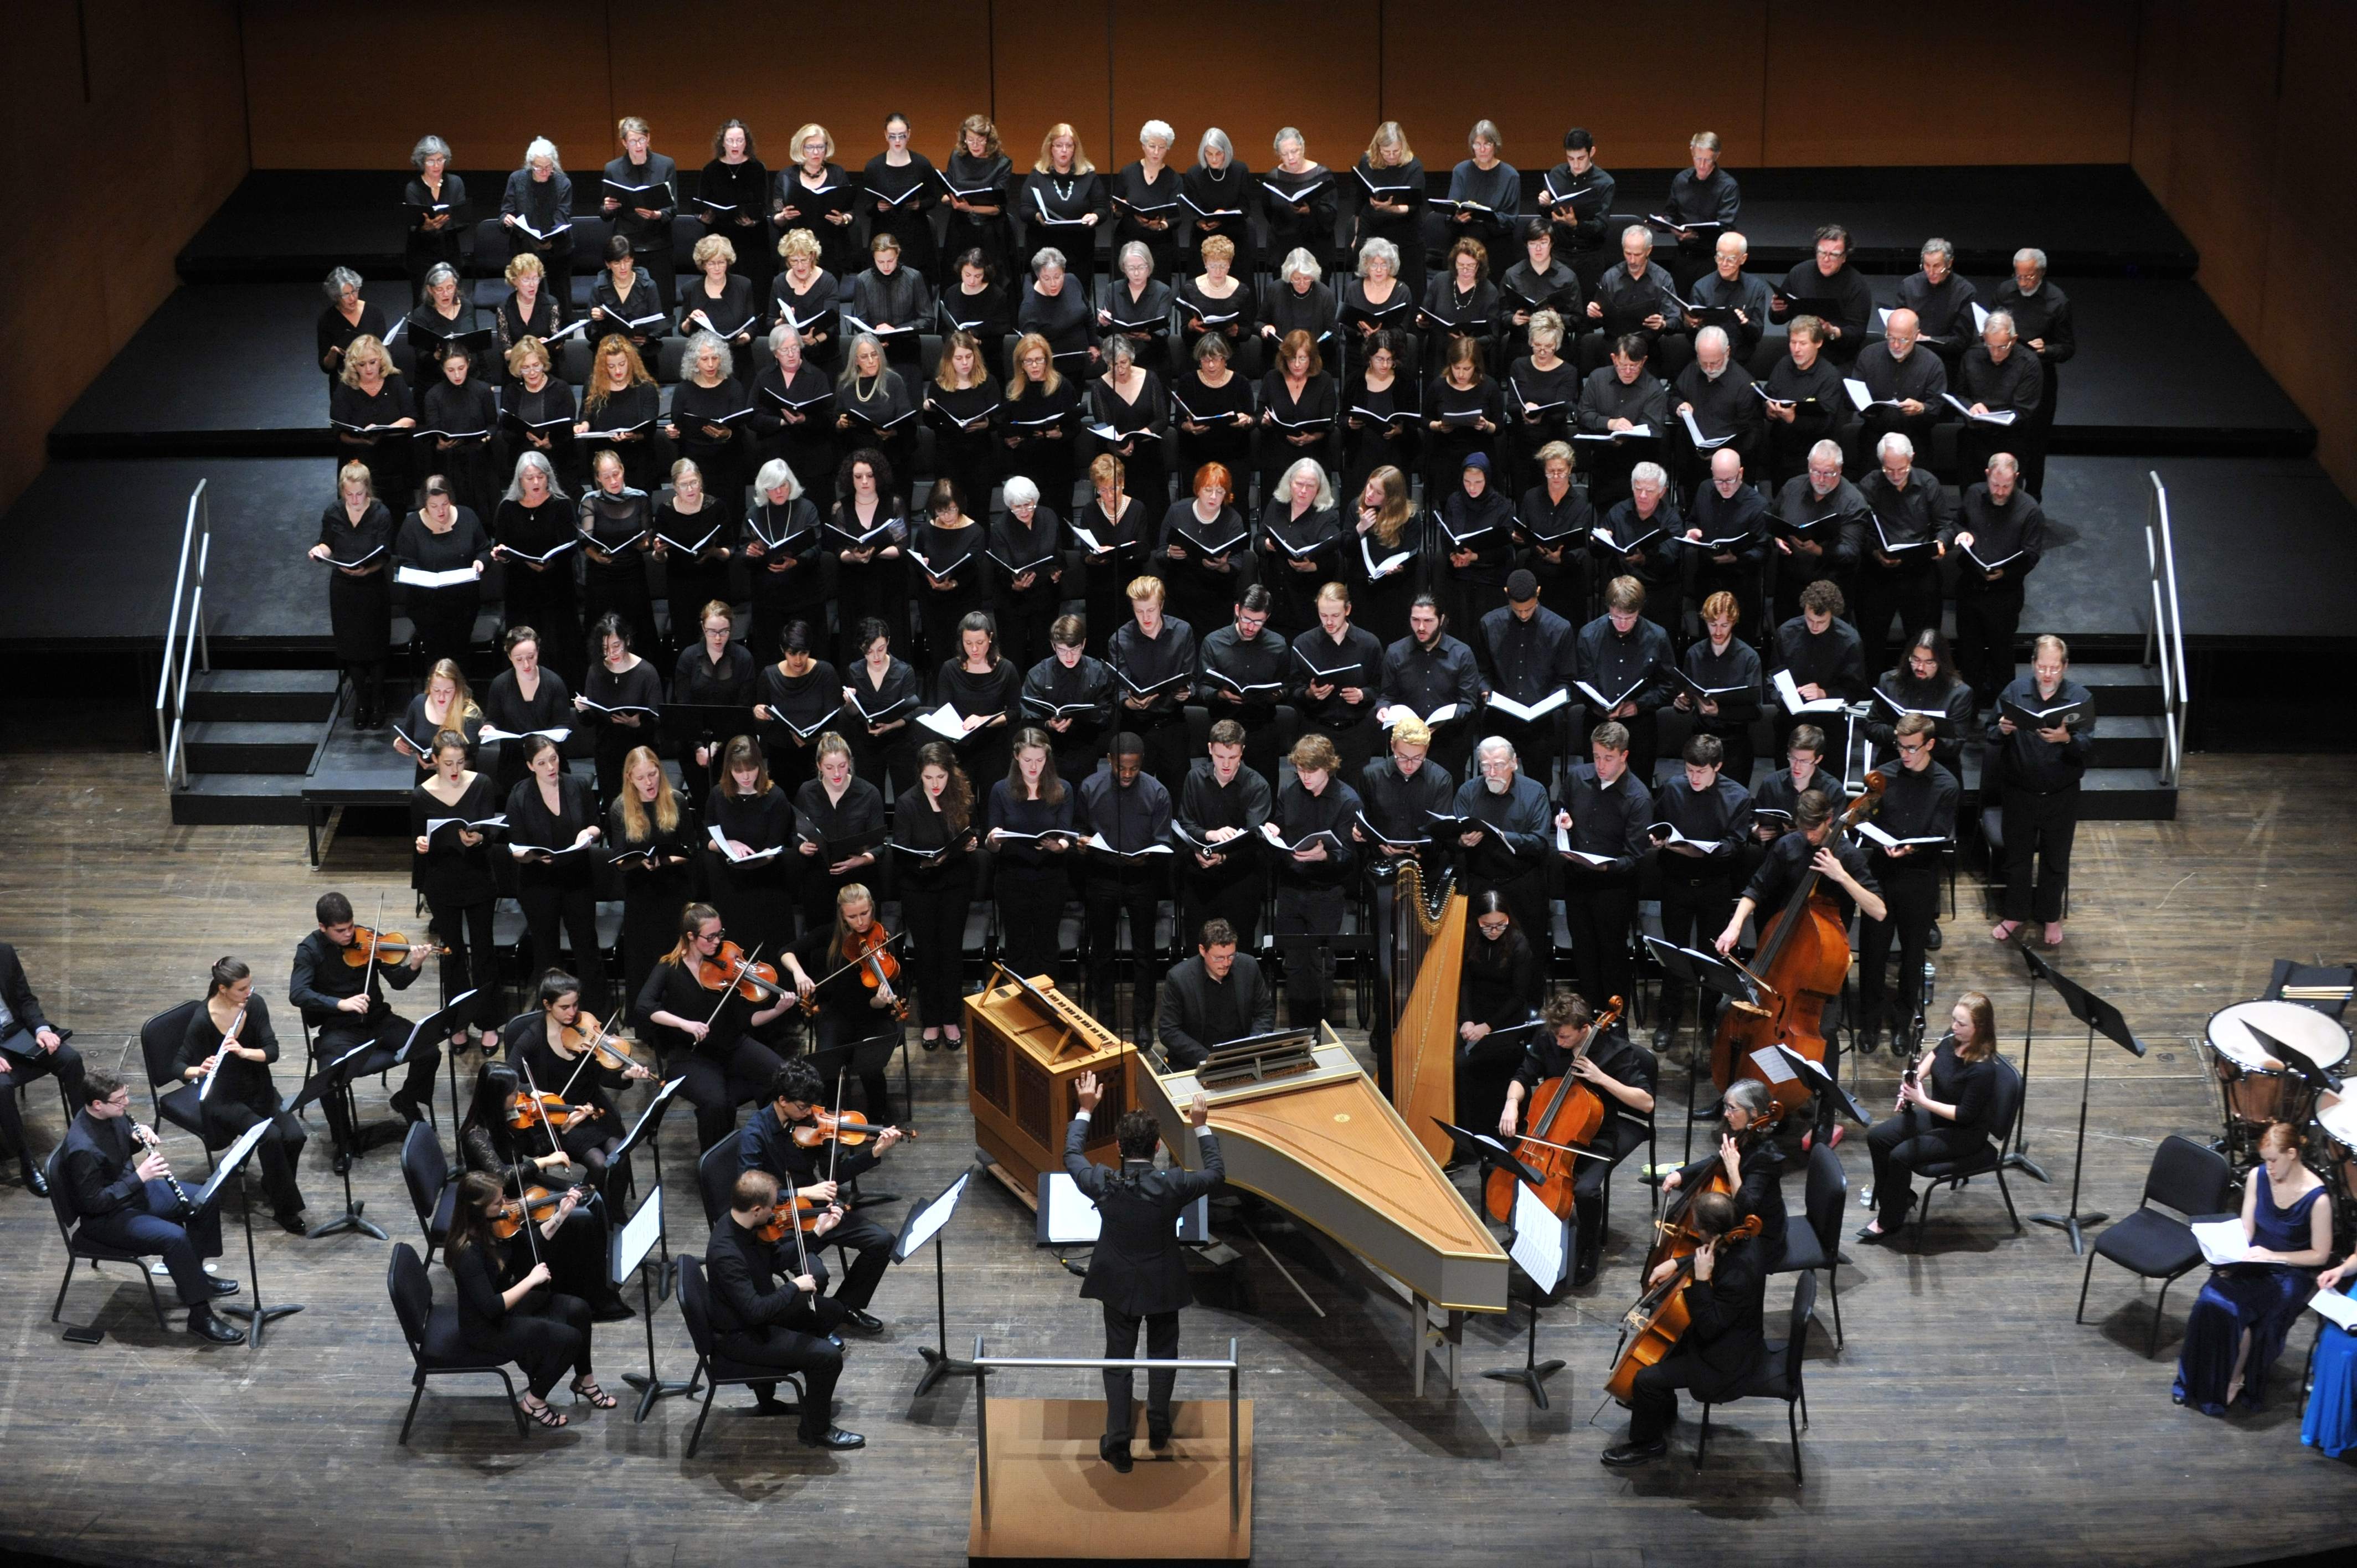 Bard College Chamber Singers and Bard College Symphonic Chorus